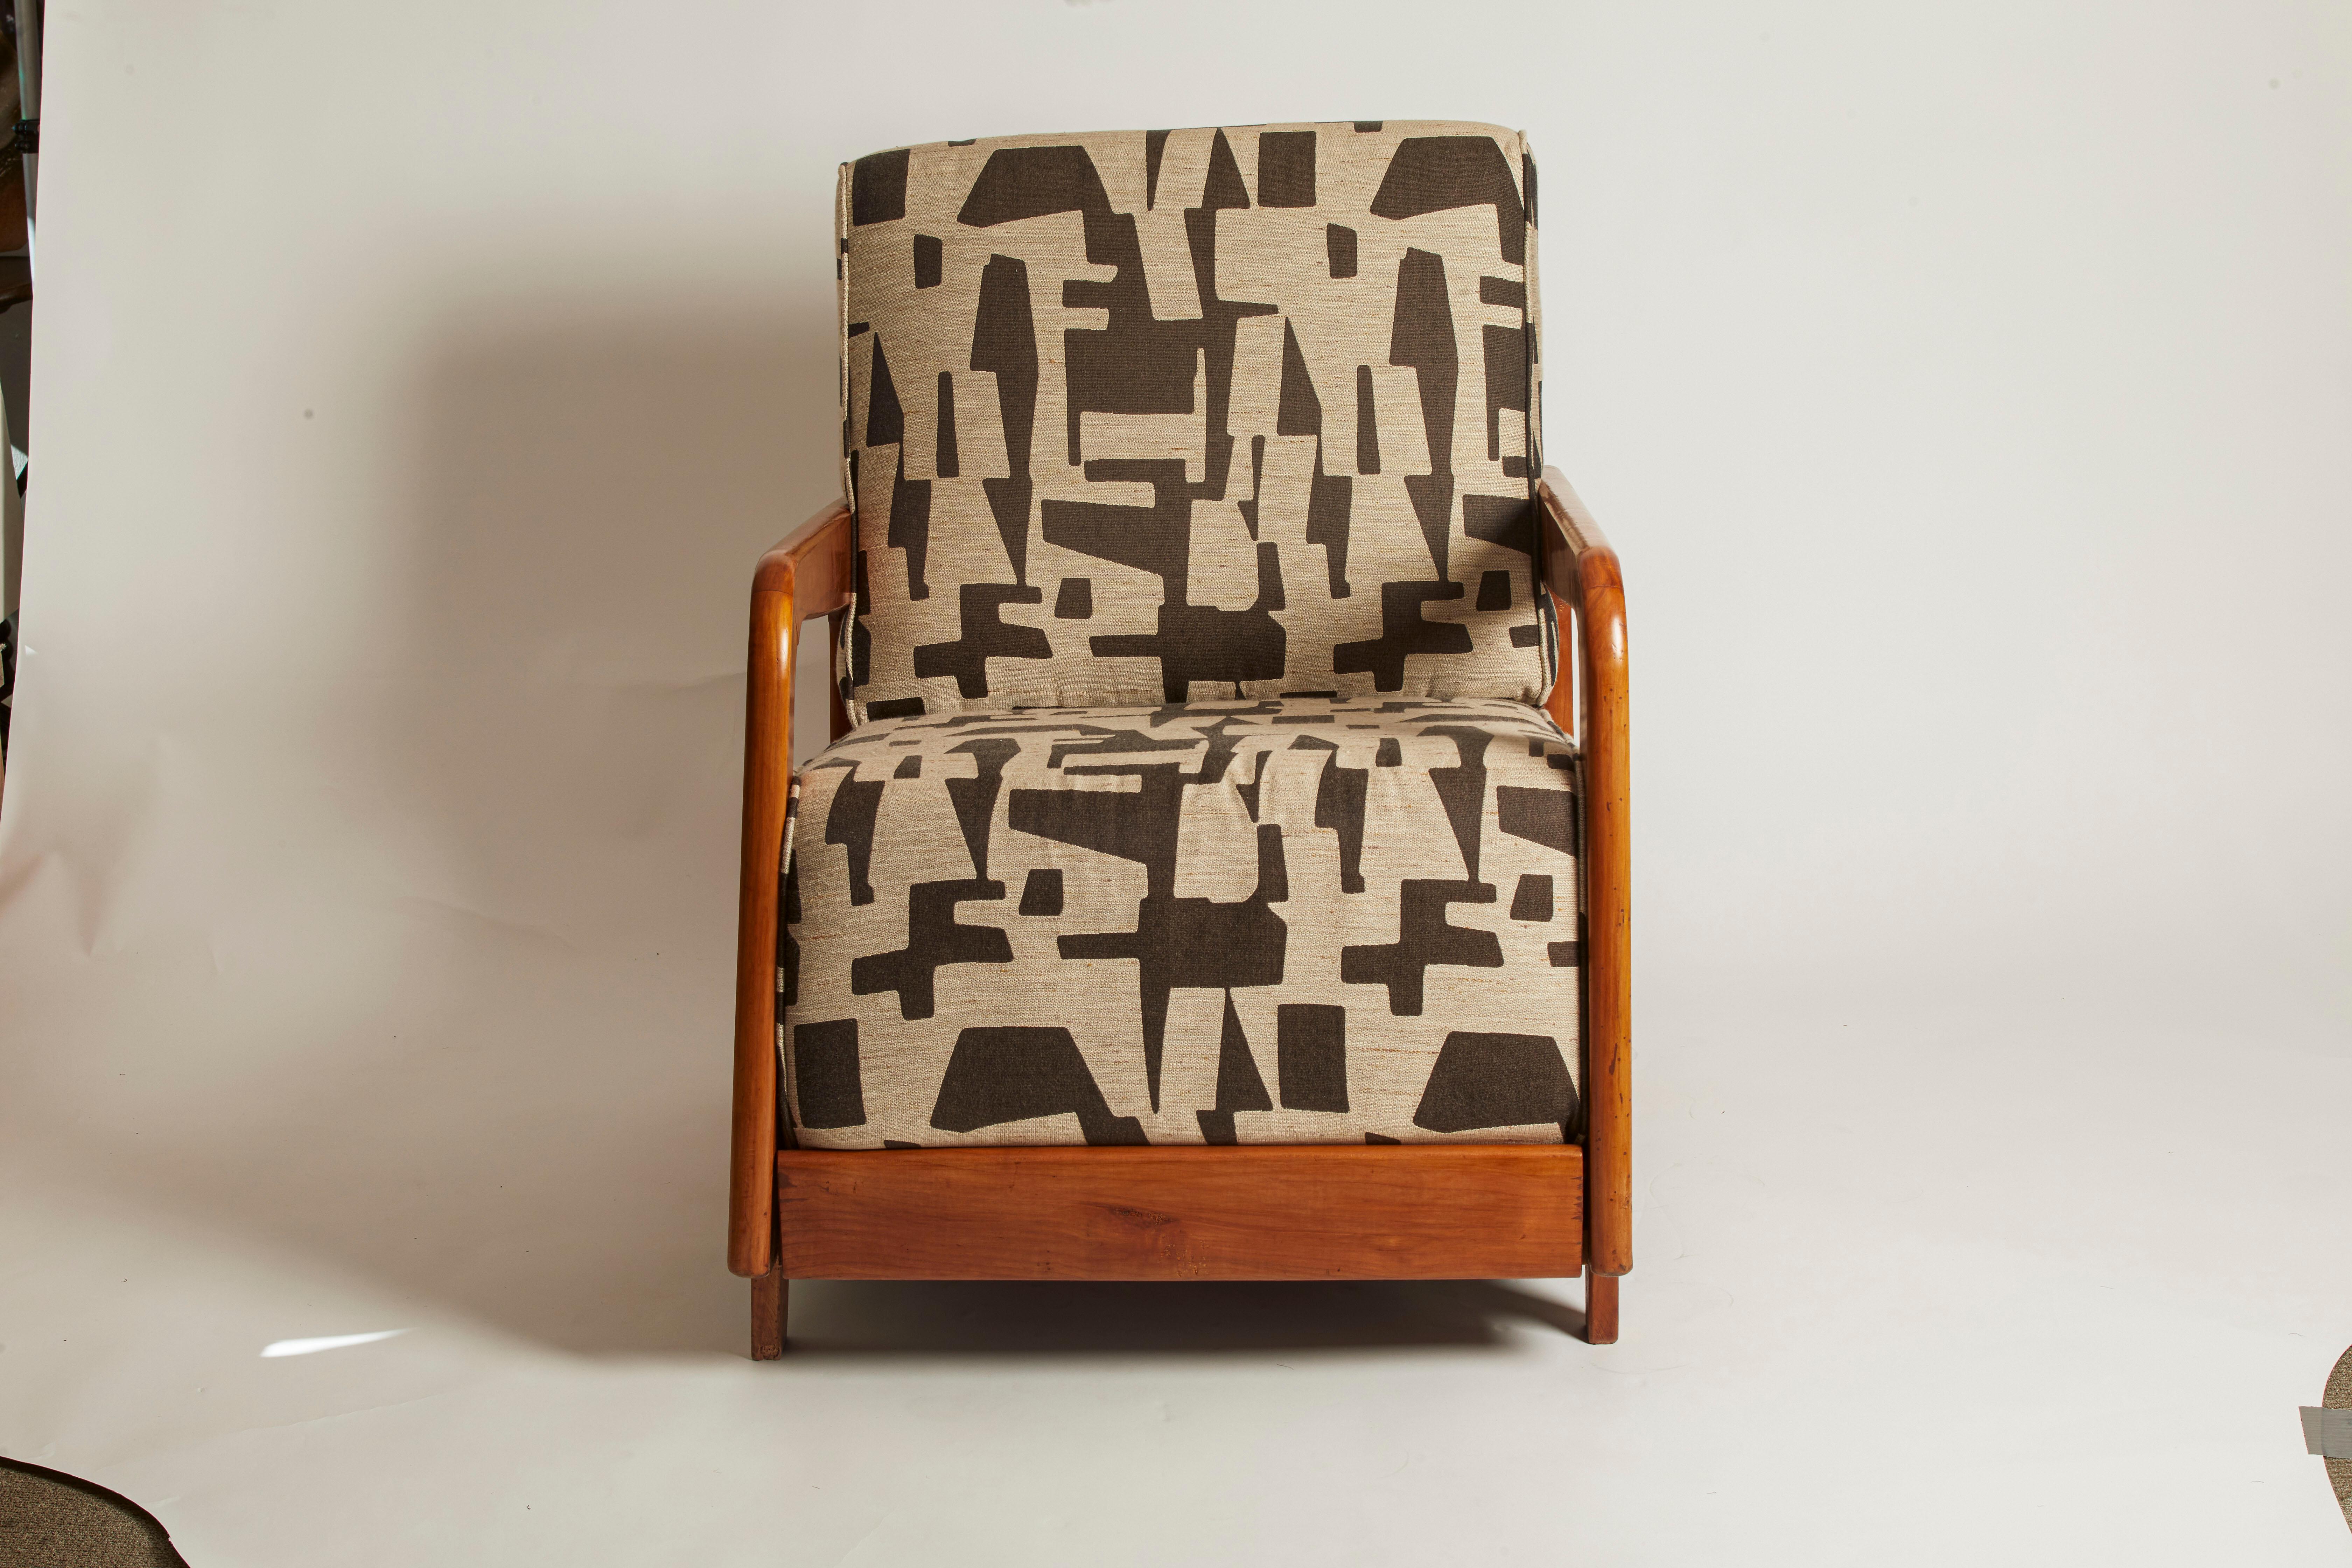 Italian 1950's Walnut Armchair restored and reupholstered in jacquard fabric. This unique chair is in pristine condition.